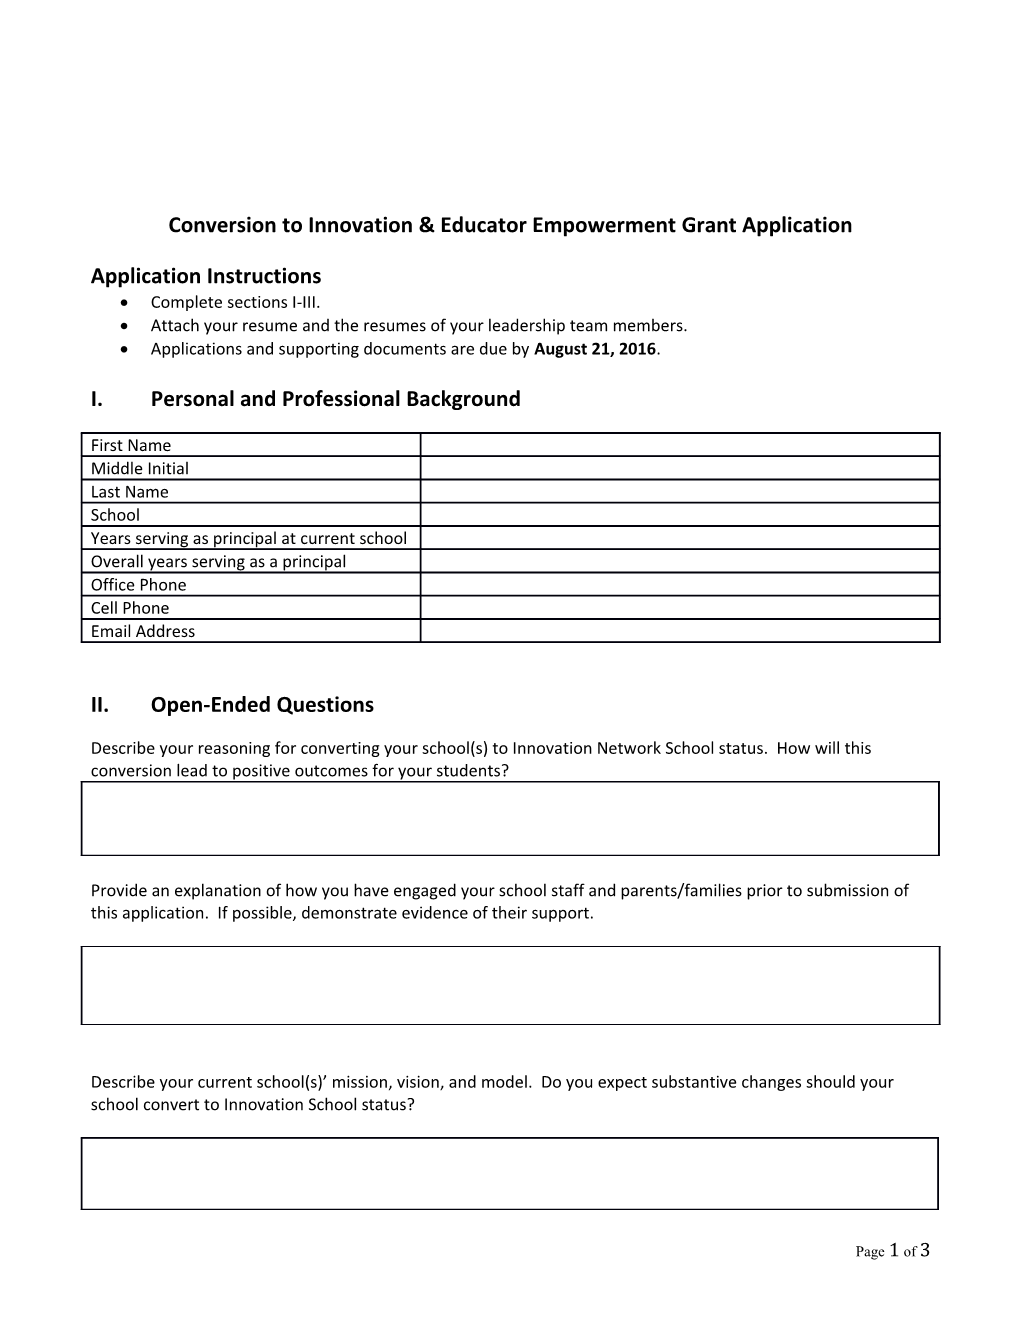 Conversion to Innovation & Educator Empowerment Grant Application